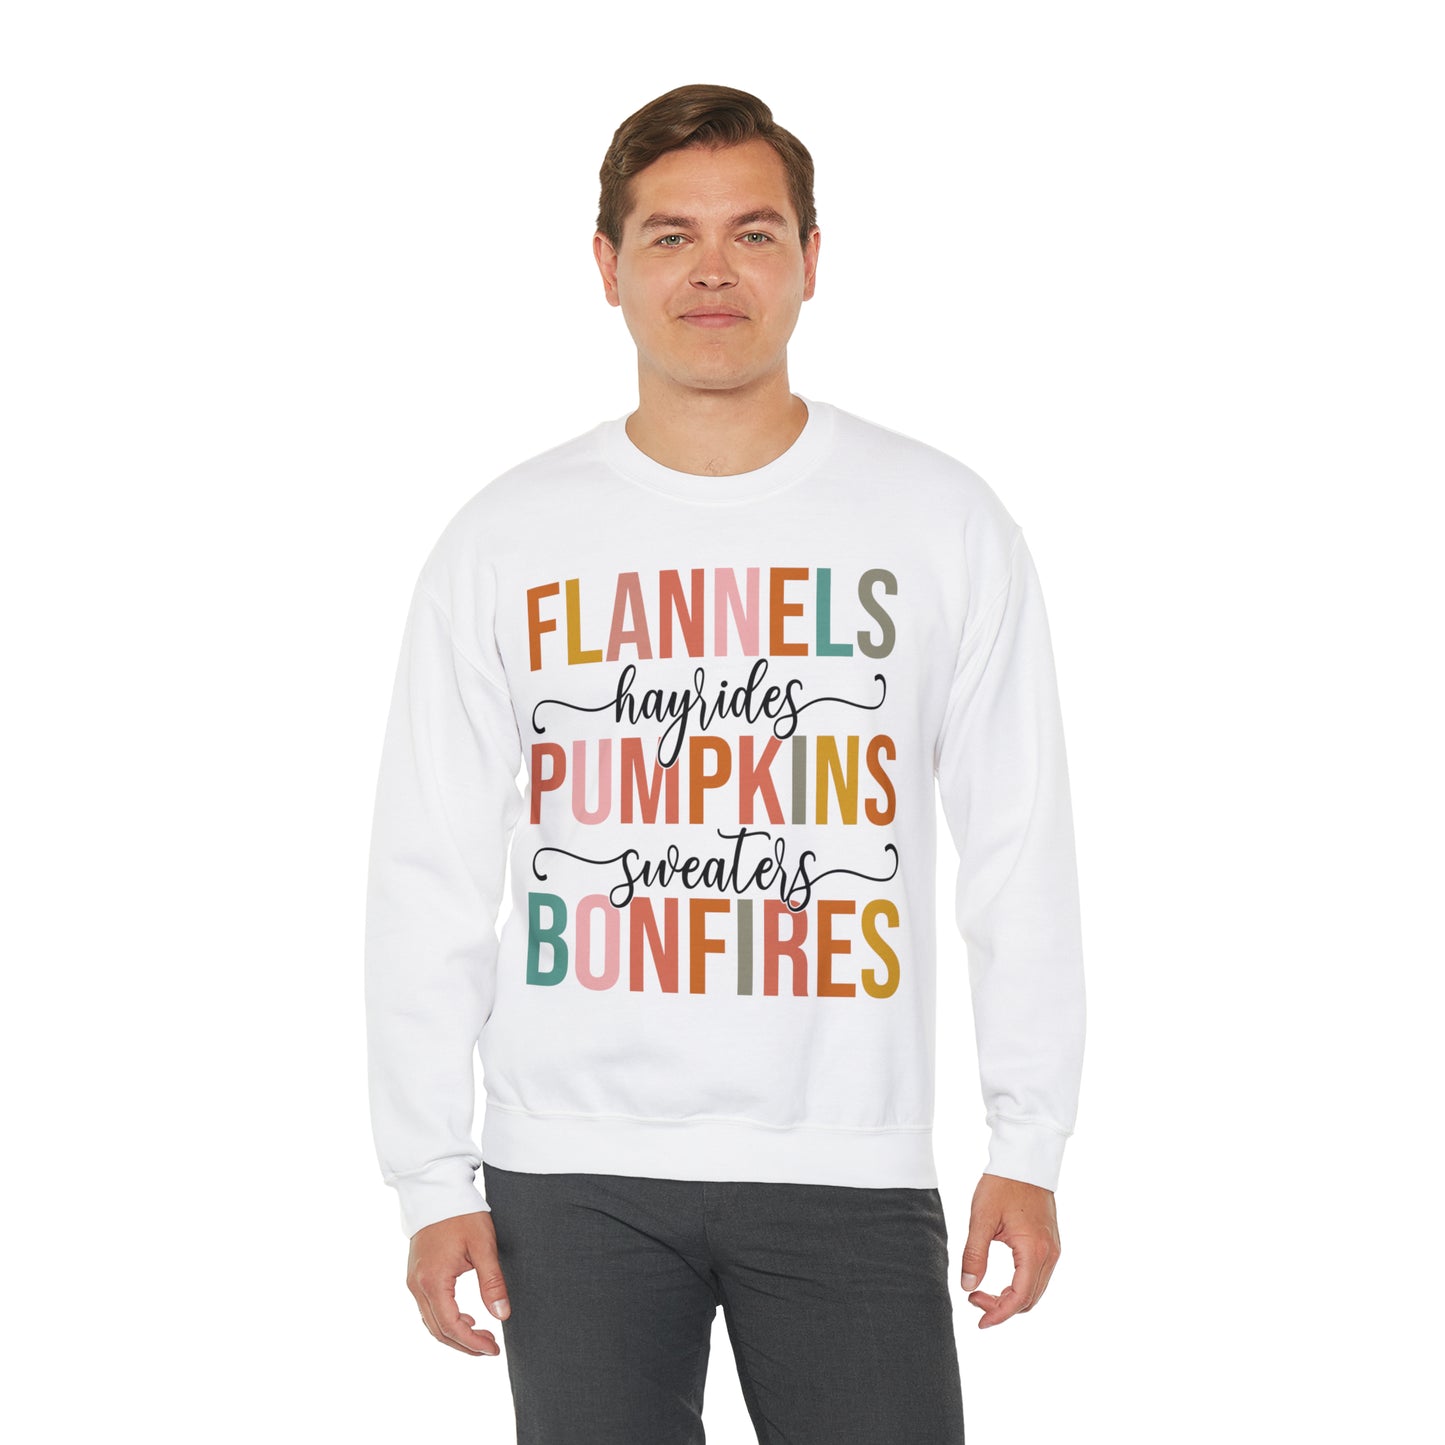 "Embrace Autumn Vibes: The Ultimate Cozy Sweatshirt Experience"